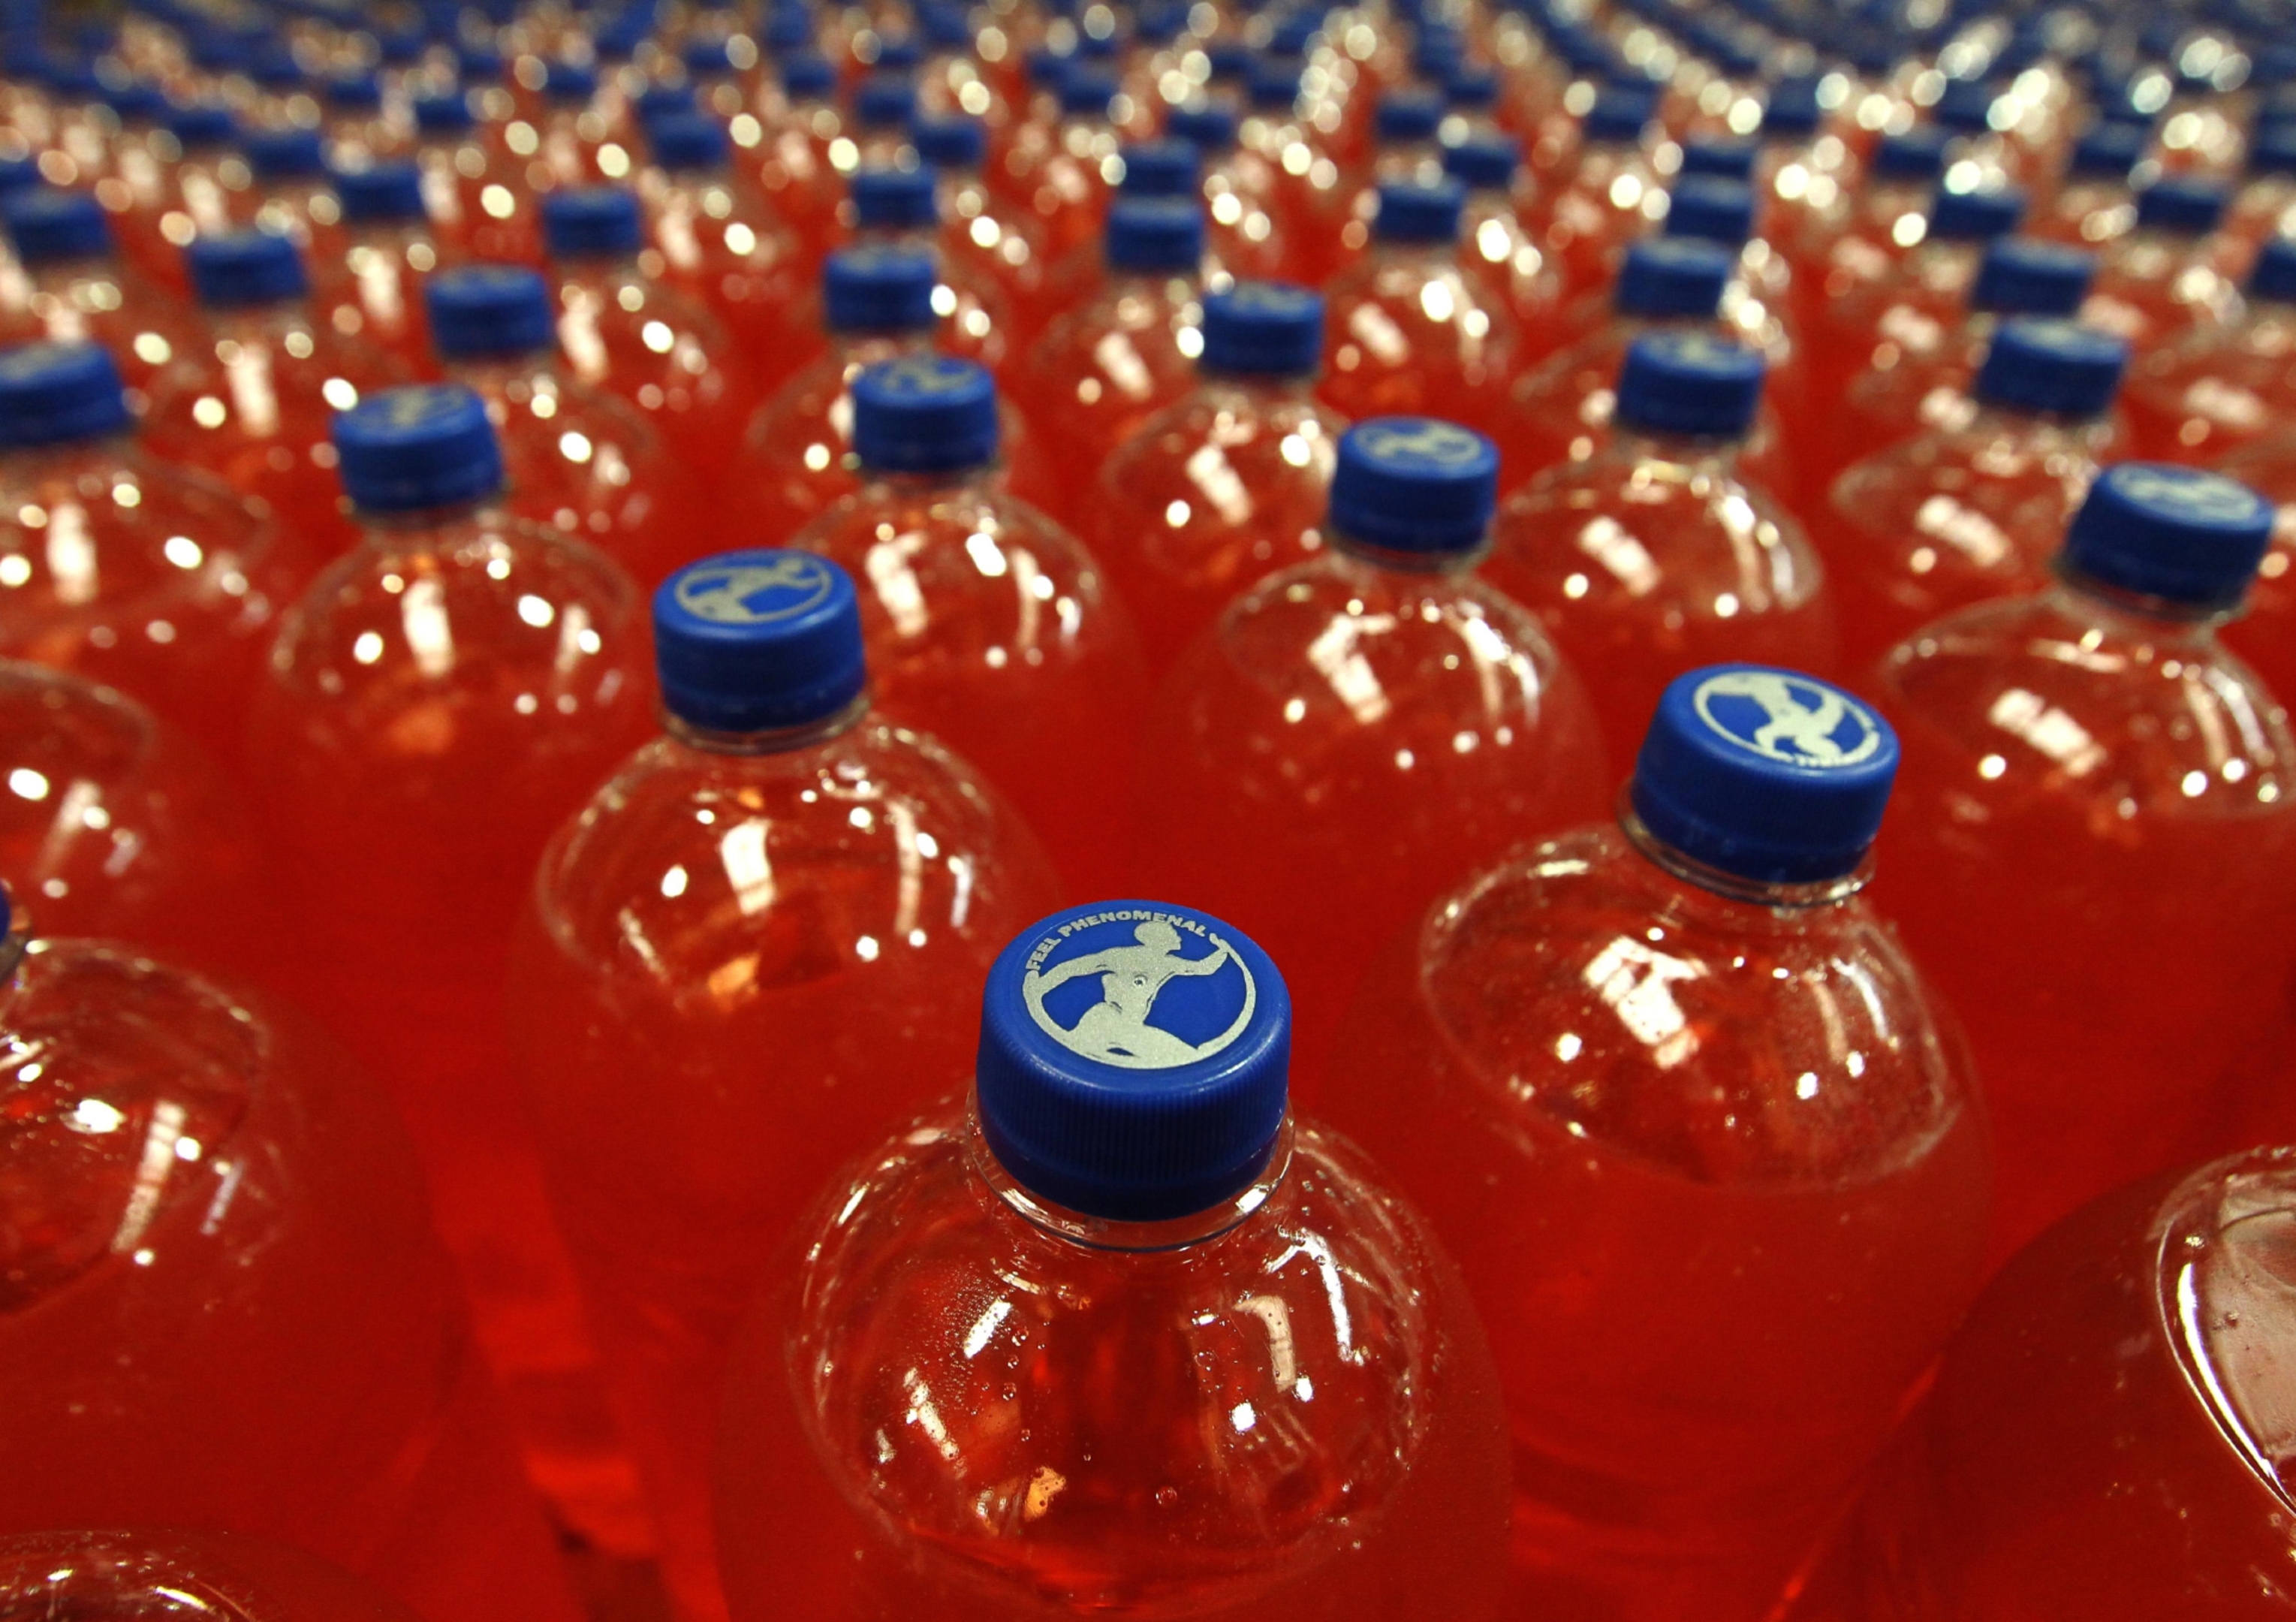 Nicola Sturgeon is to swerve the row over the sugar content of Irn-Bru.